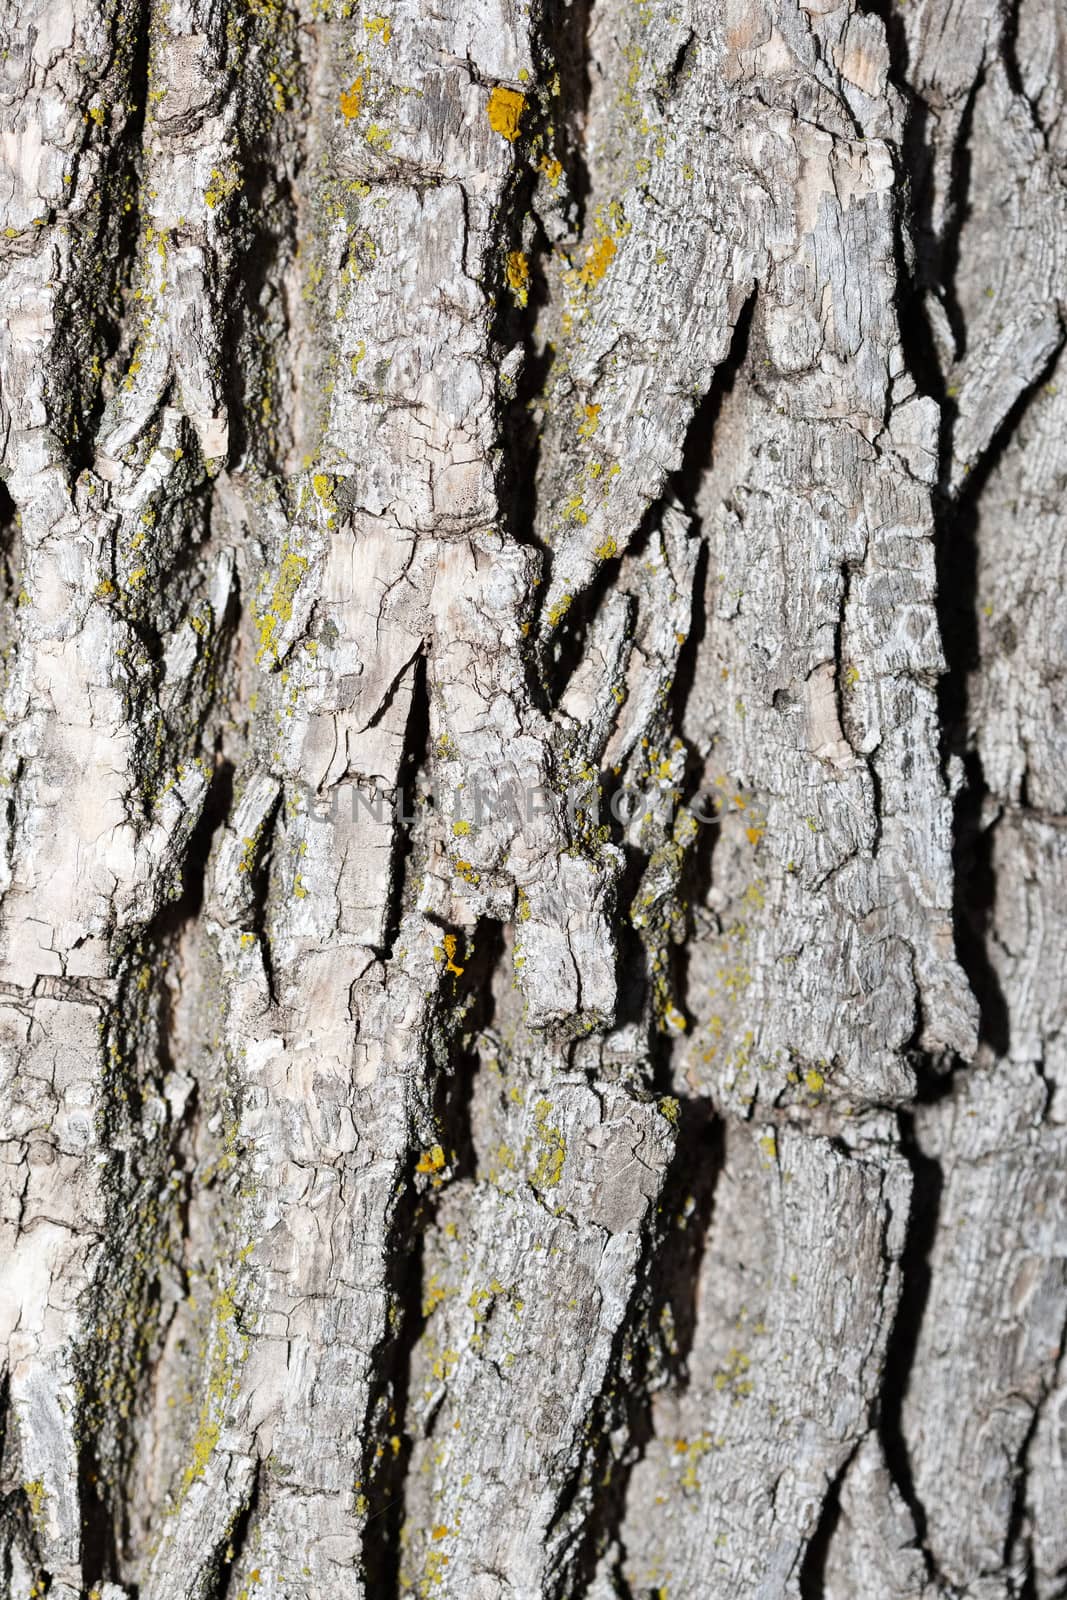 Background of bark on an old tree.